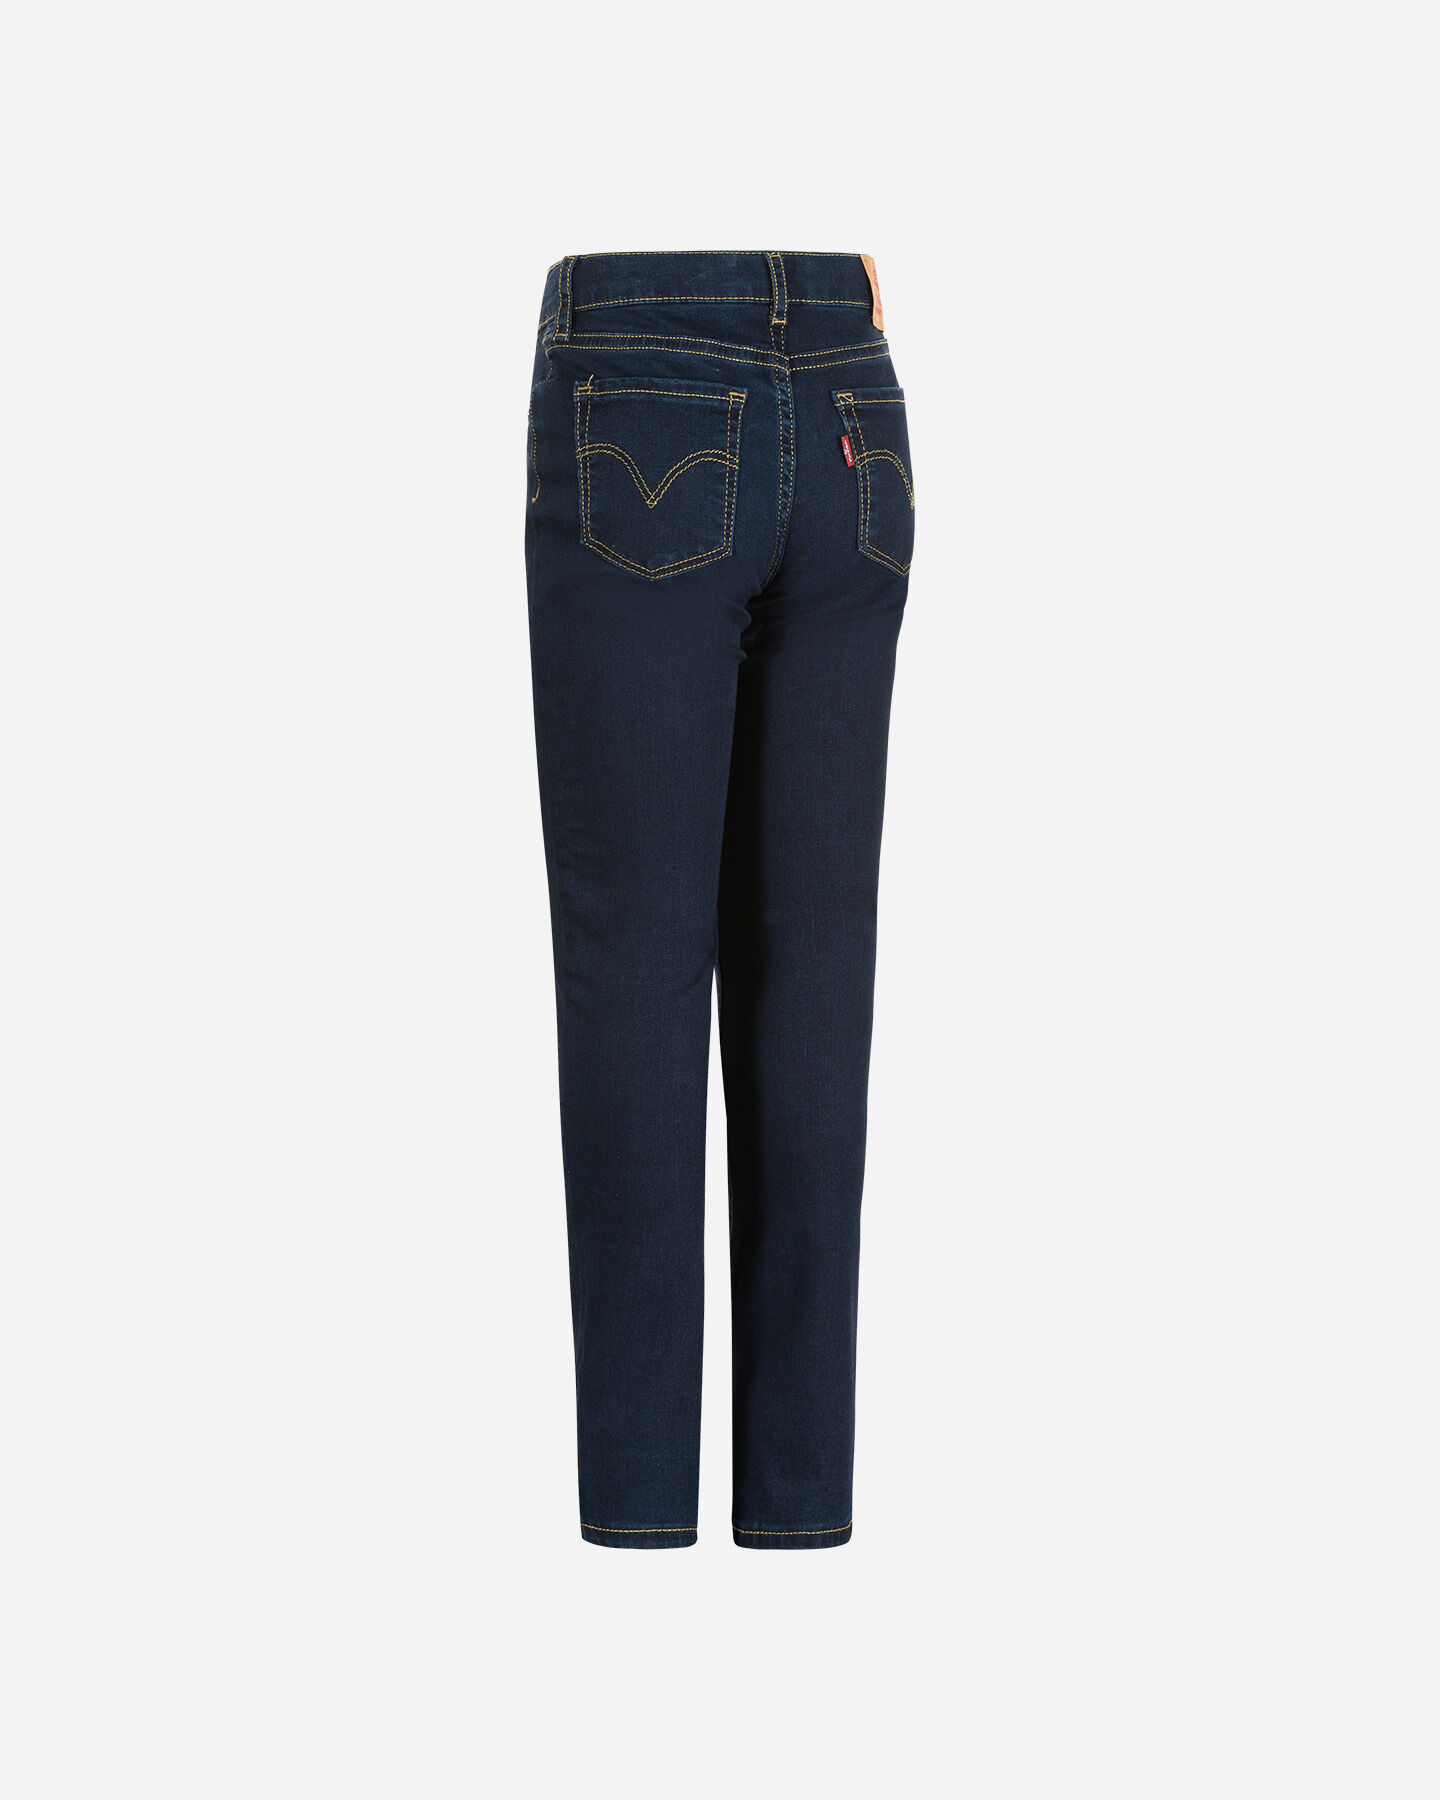  Jeans LEVI'S 711 SKINNY JR S4083744|F56|6A scatto 1